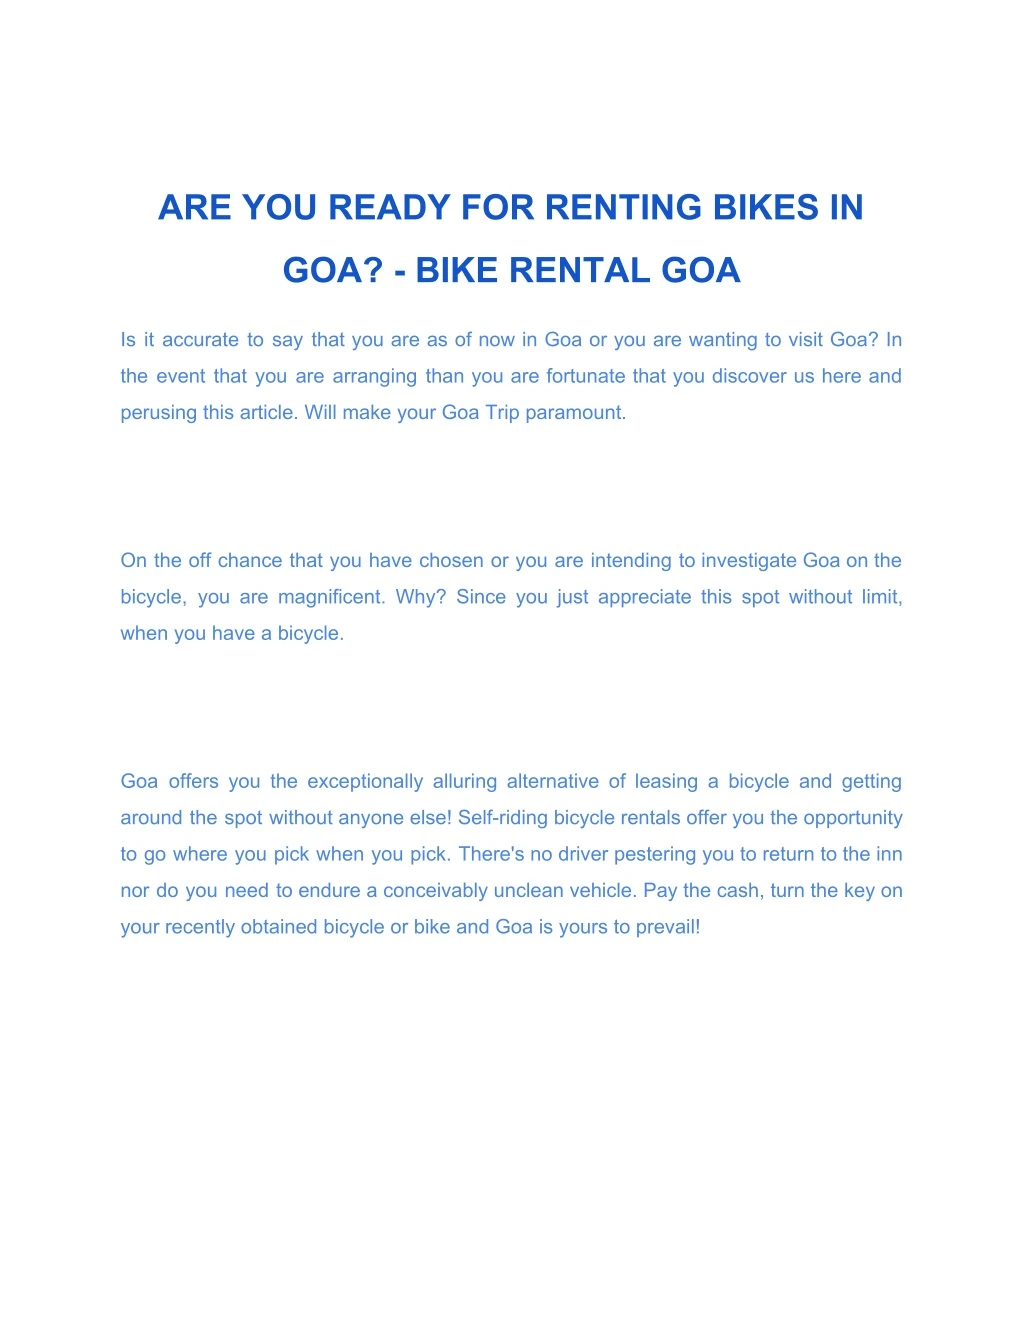 are you ready for renting bikes in